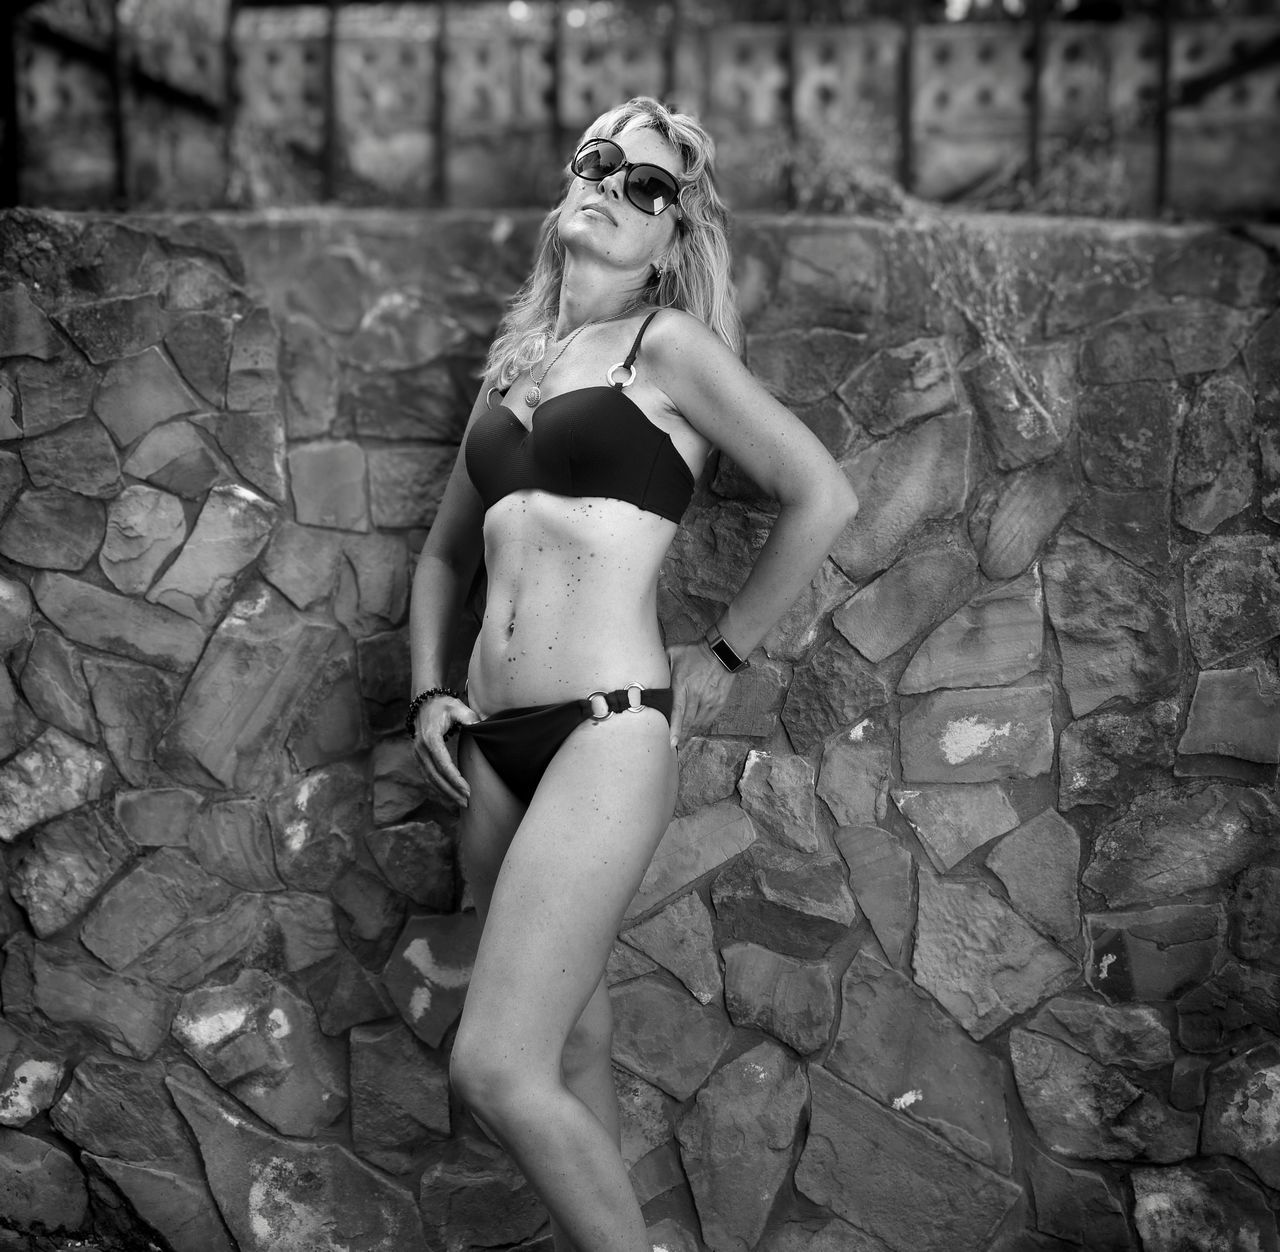 black and white, women, one person, adult, clothing, monochrome photography, young adult, fashion, photo shoot, monochrome, swimwear, lifestyles, bikini, lingerie, black, full length, hairstyle, brassiere, female, white, long hair, leisure activity, portrait, glasses, underwear, sunglasses, nature, person, human leg, swimsuit bottom, outdoors, blond hair, day, undergarment, summer, standing, relaxation, looking, sitting, hand